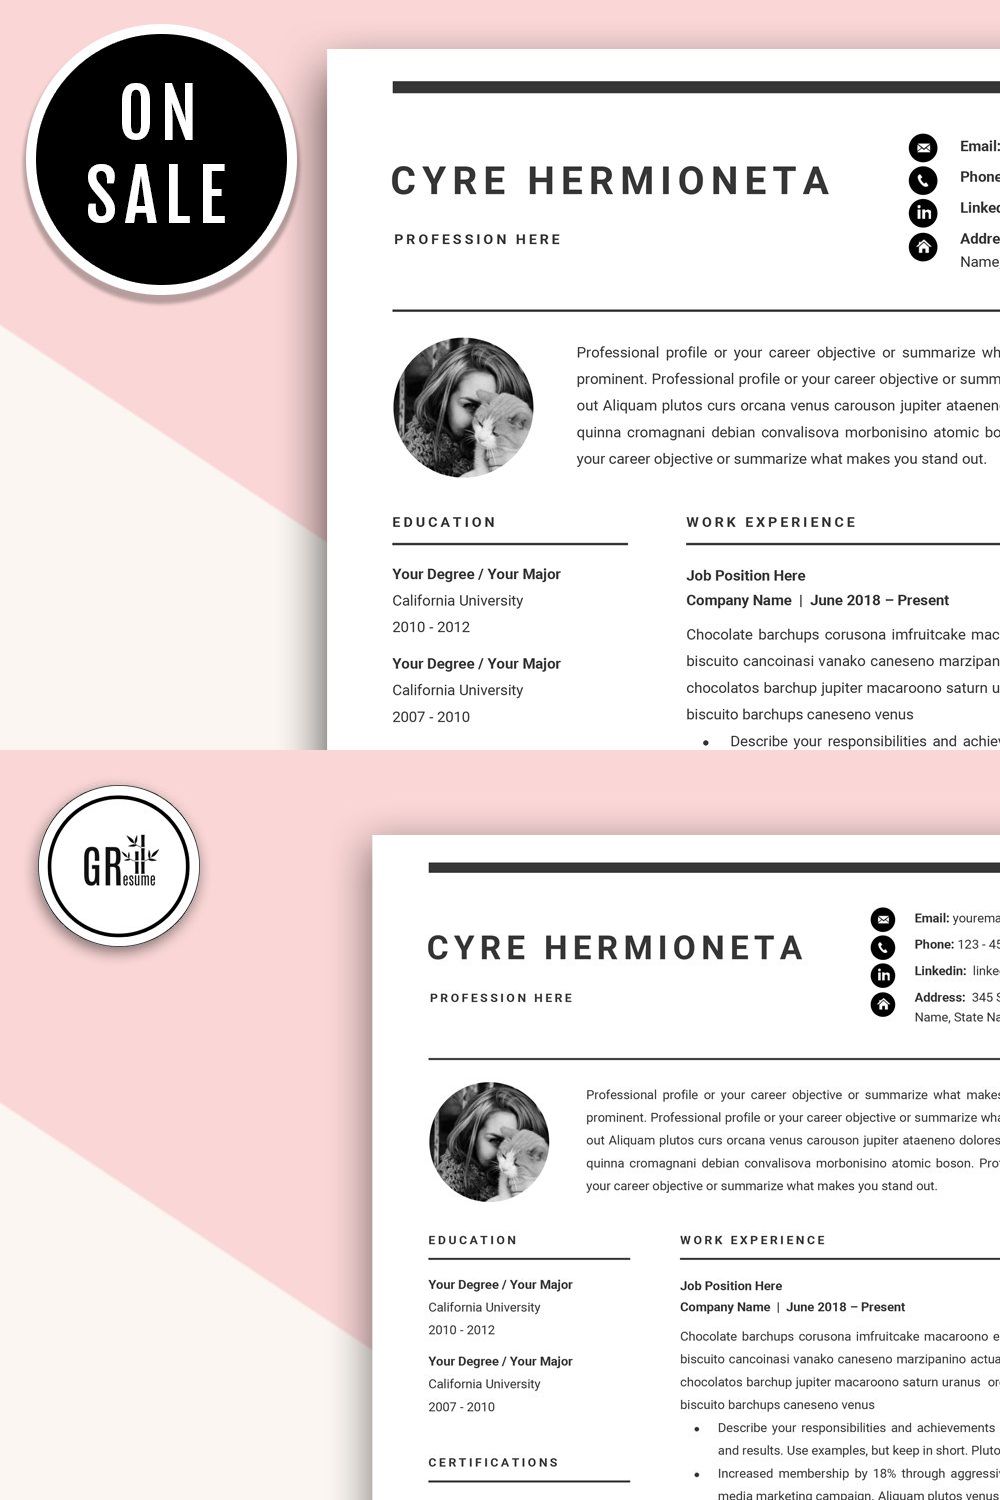 Resume Template | CV Template - 04 pinterest preview image.